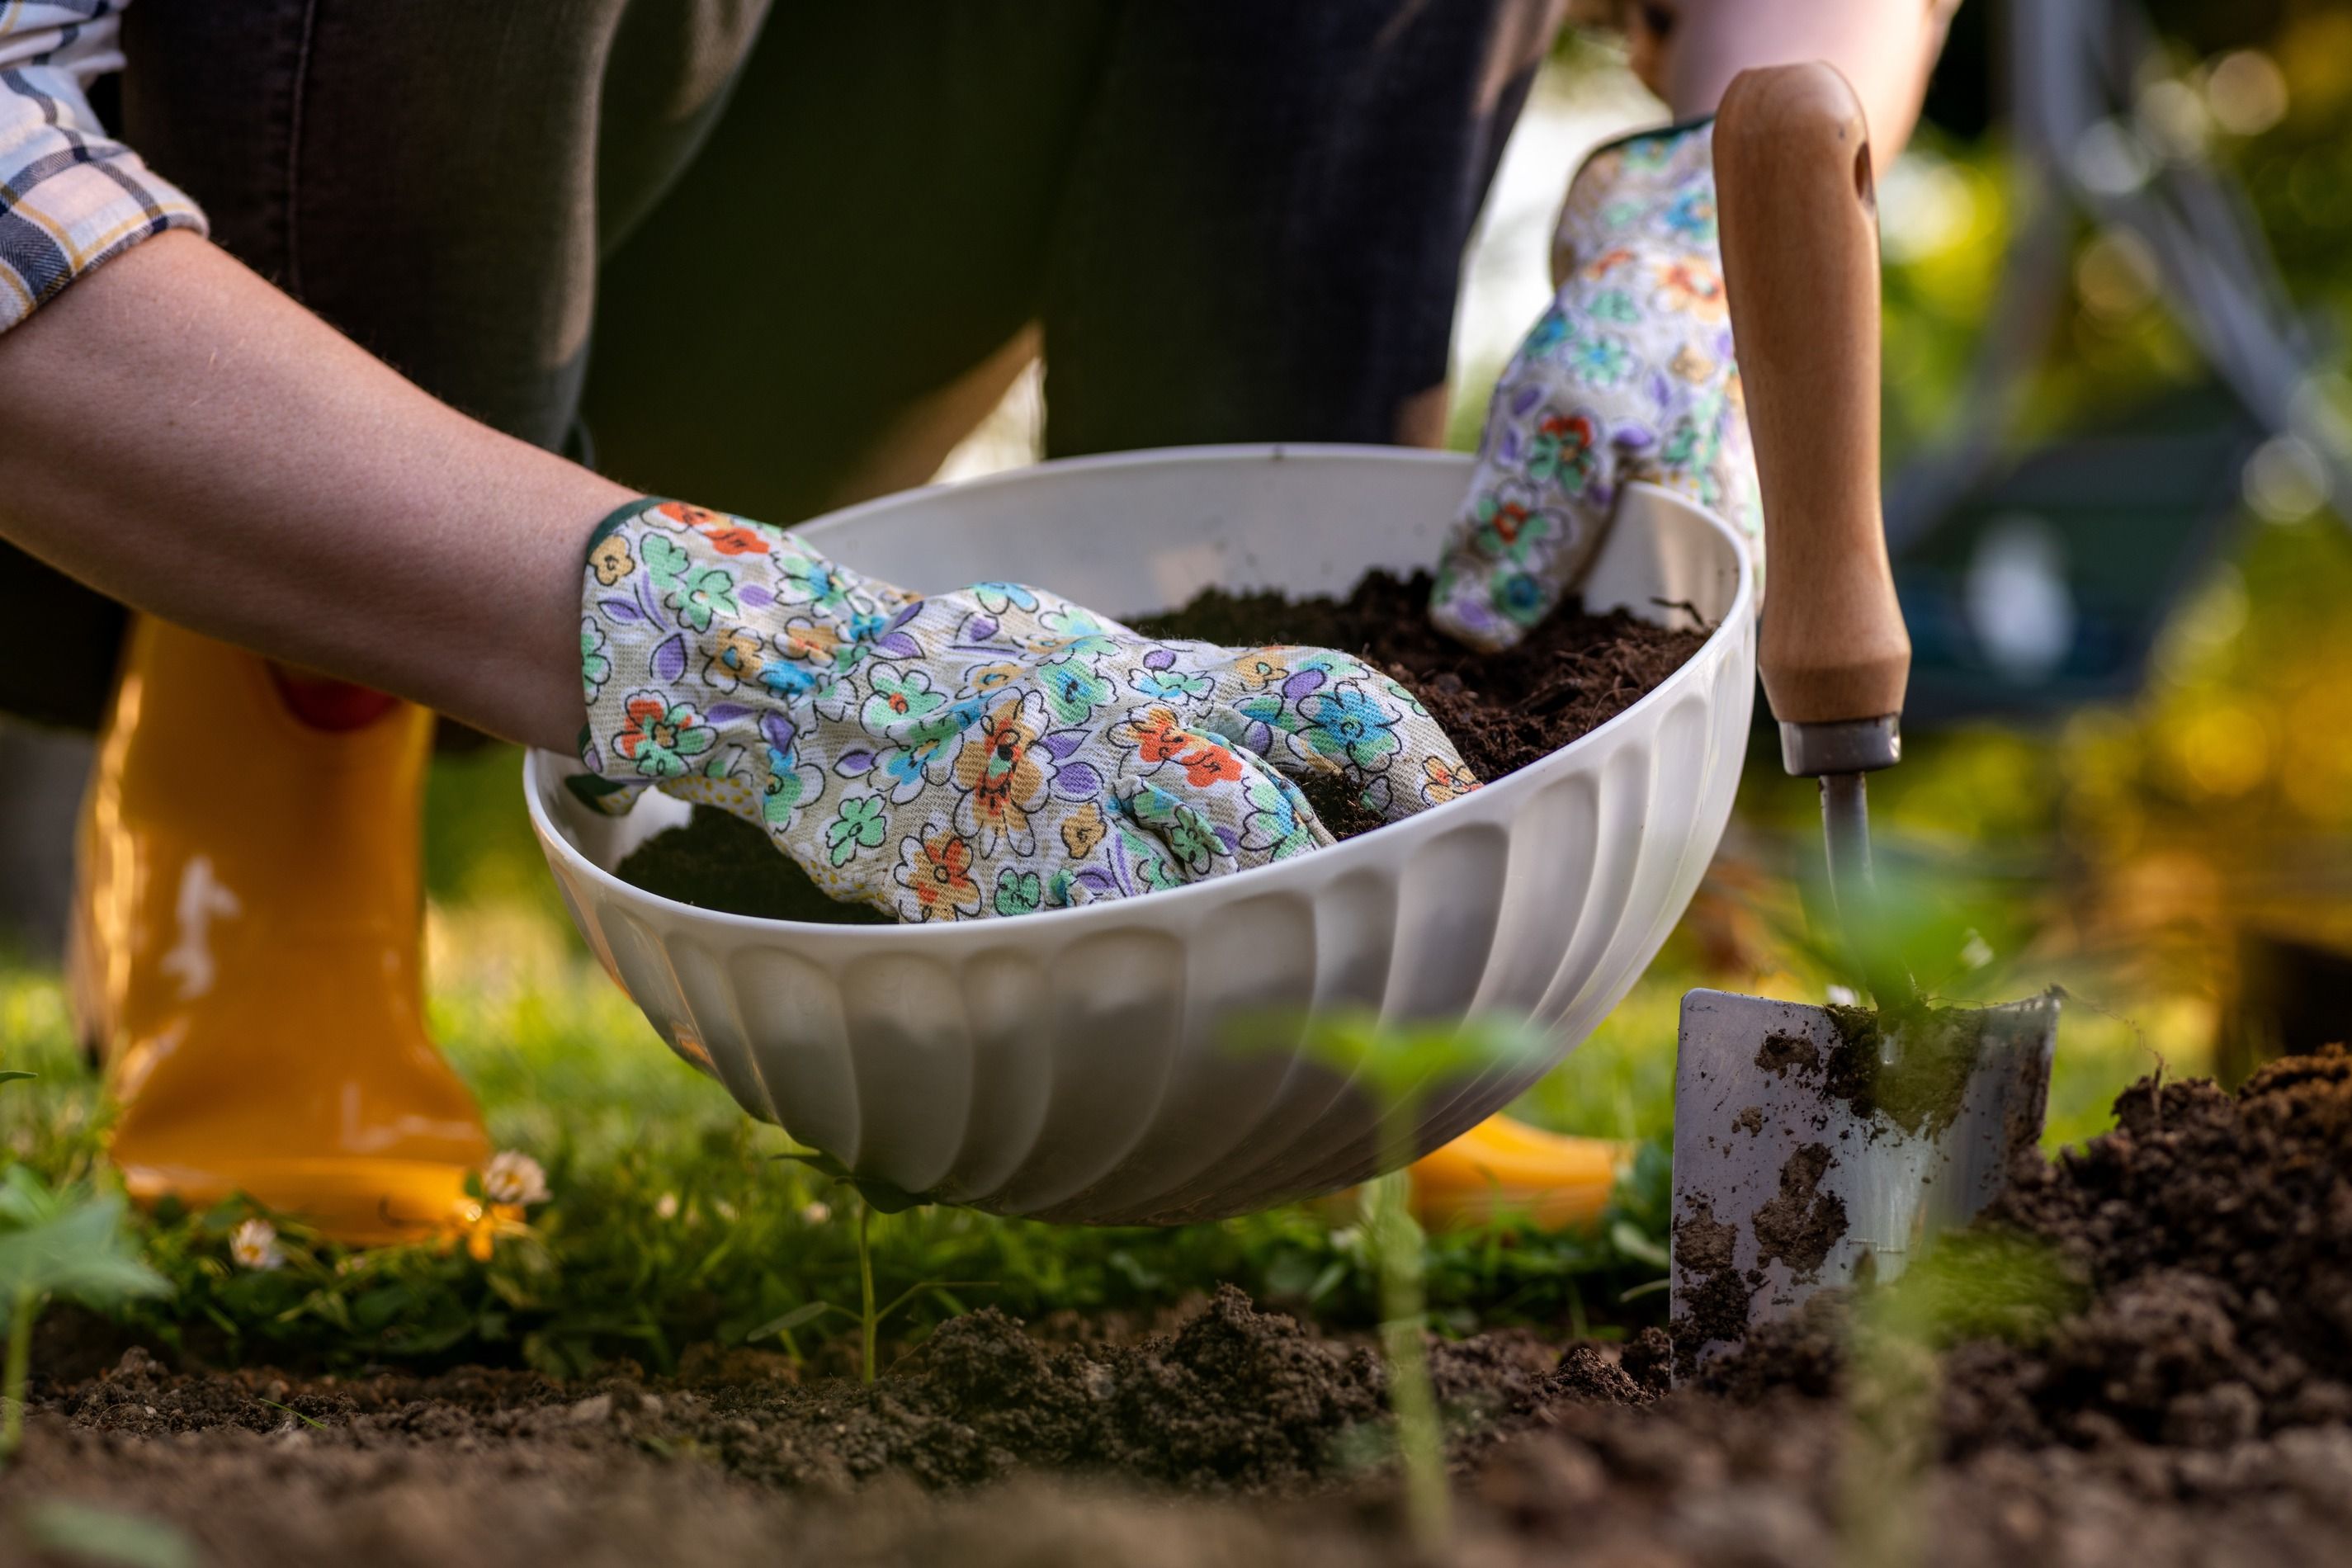 Adding compost to garden soil to amend it